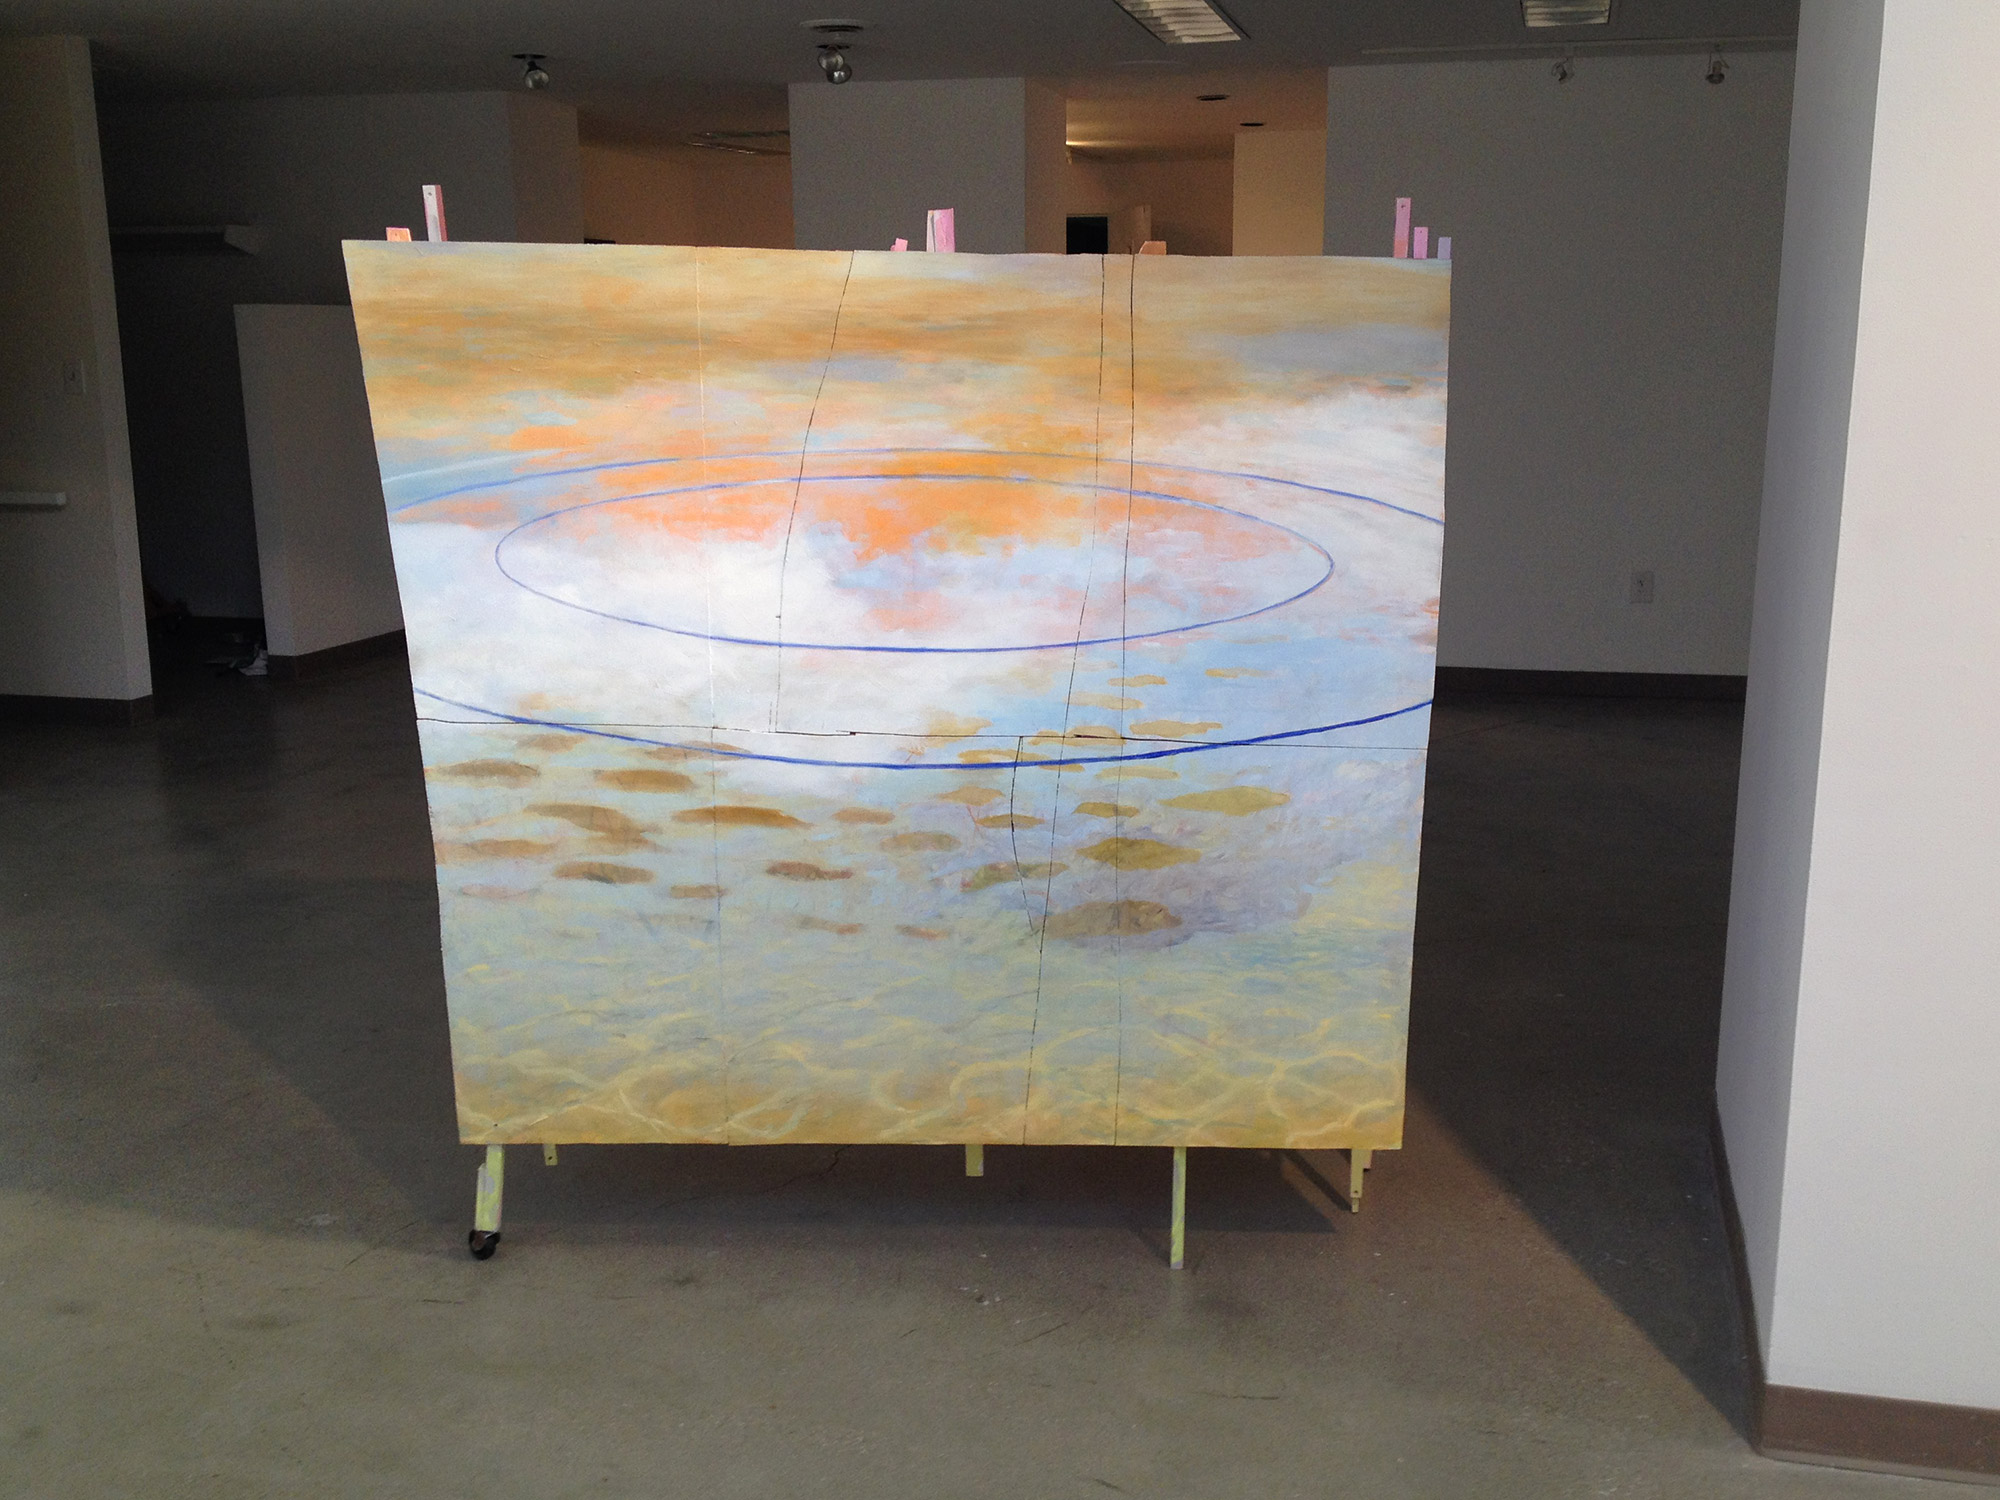   Standing in Water V   Oil and acrylic on wood, wheels 65 × 59 × 62 inches 165 × 150 × 157 cm  2015 